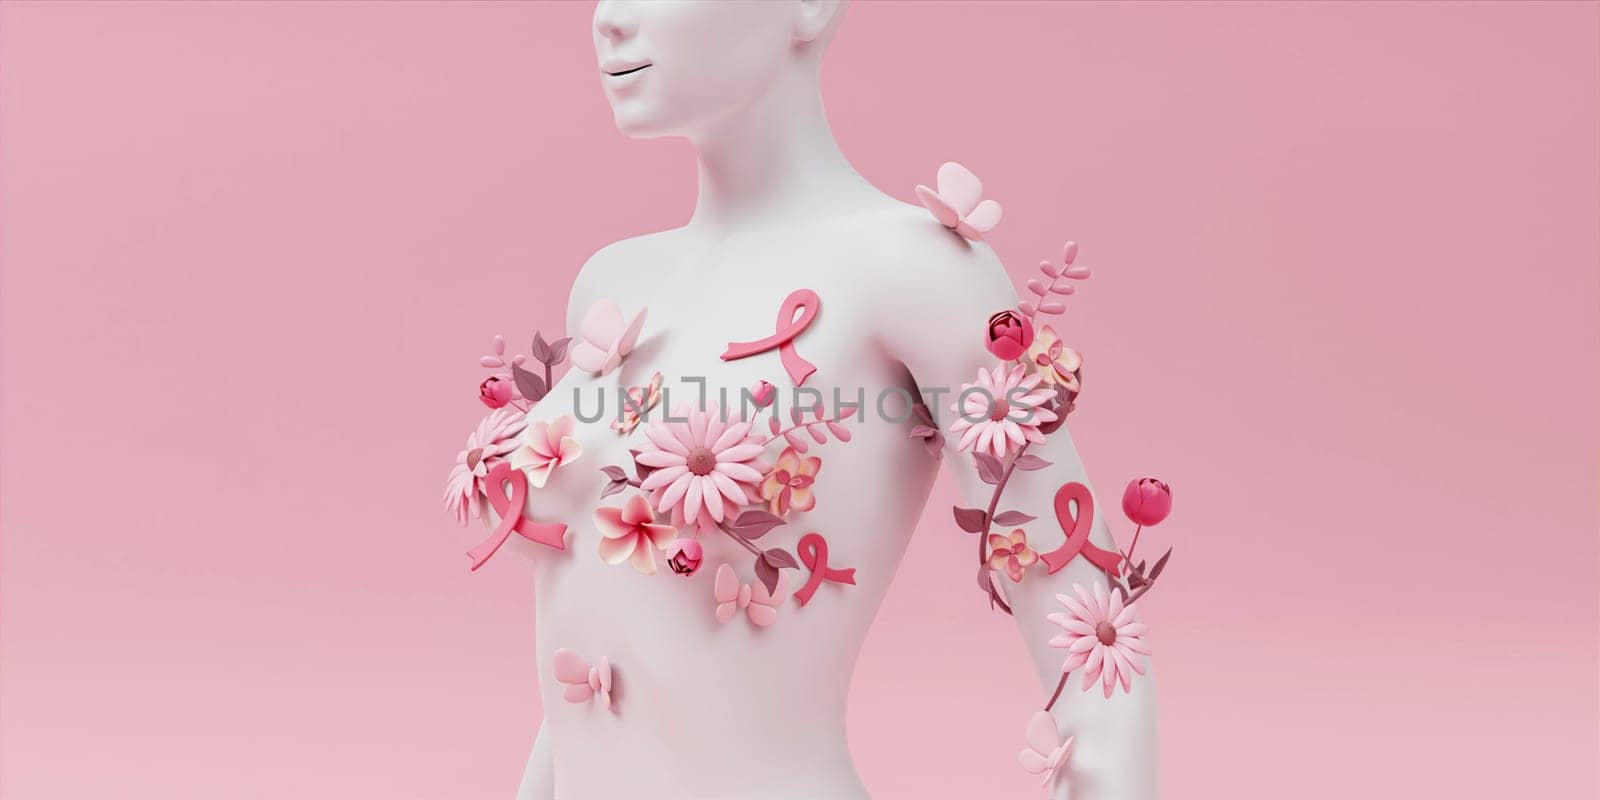 3d render, female bust, white mannequin covered with colorful paper flowers, woman silhouette isolated on pink background. Breast cancer support. Floral fashion concept. Modern botanical sculpture by meepiangraphic